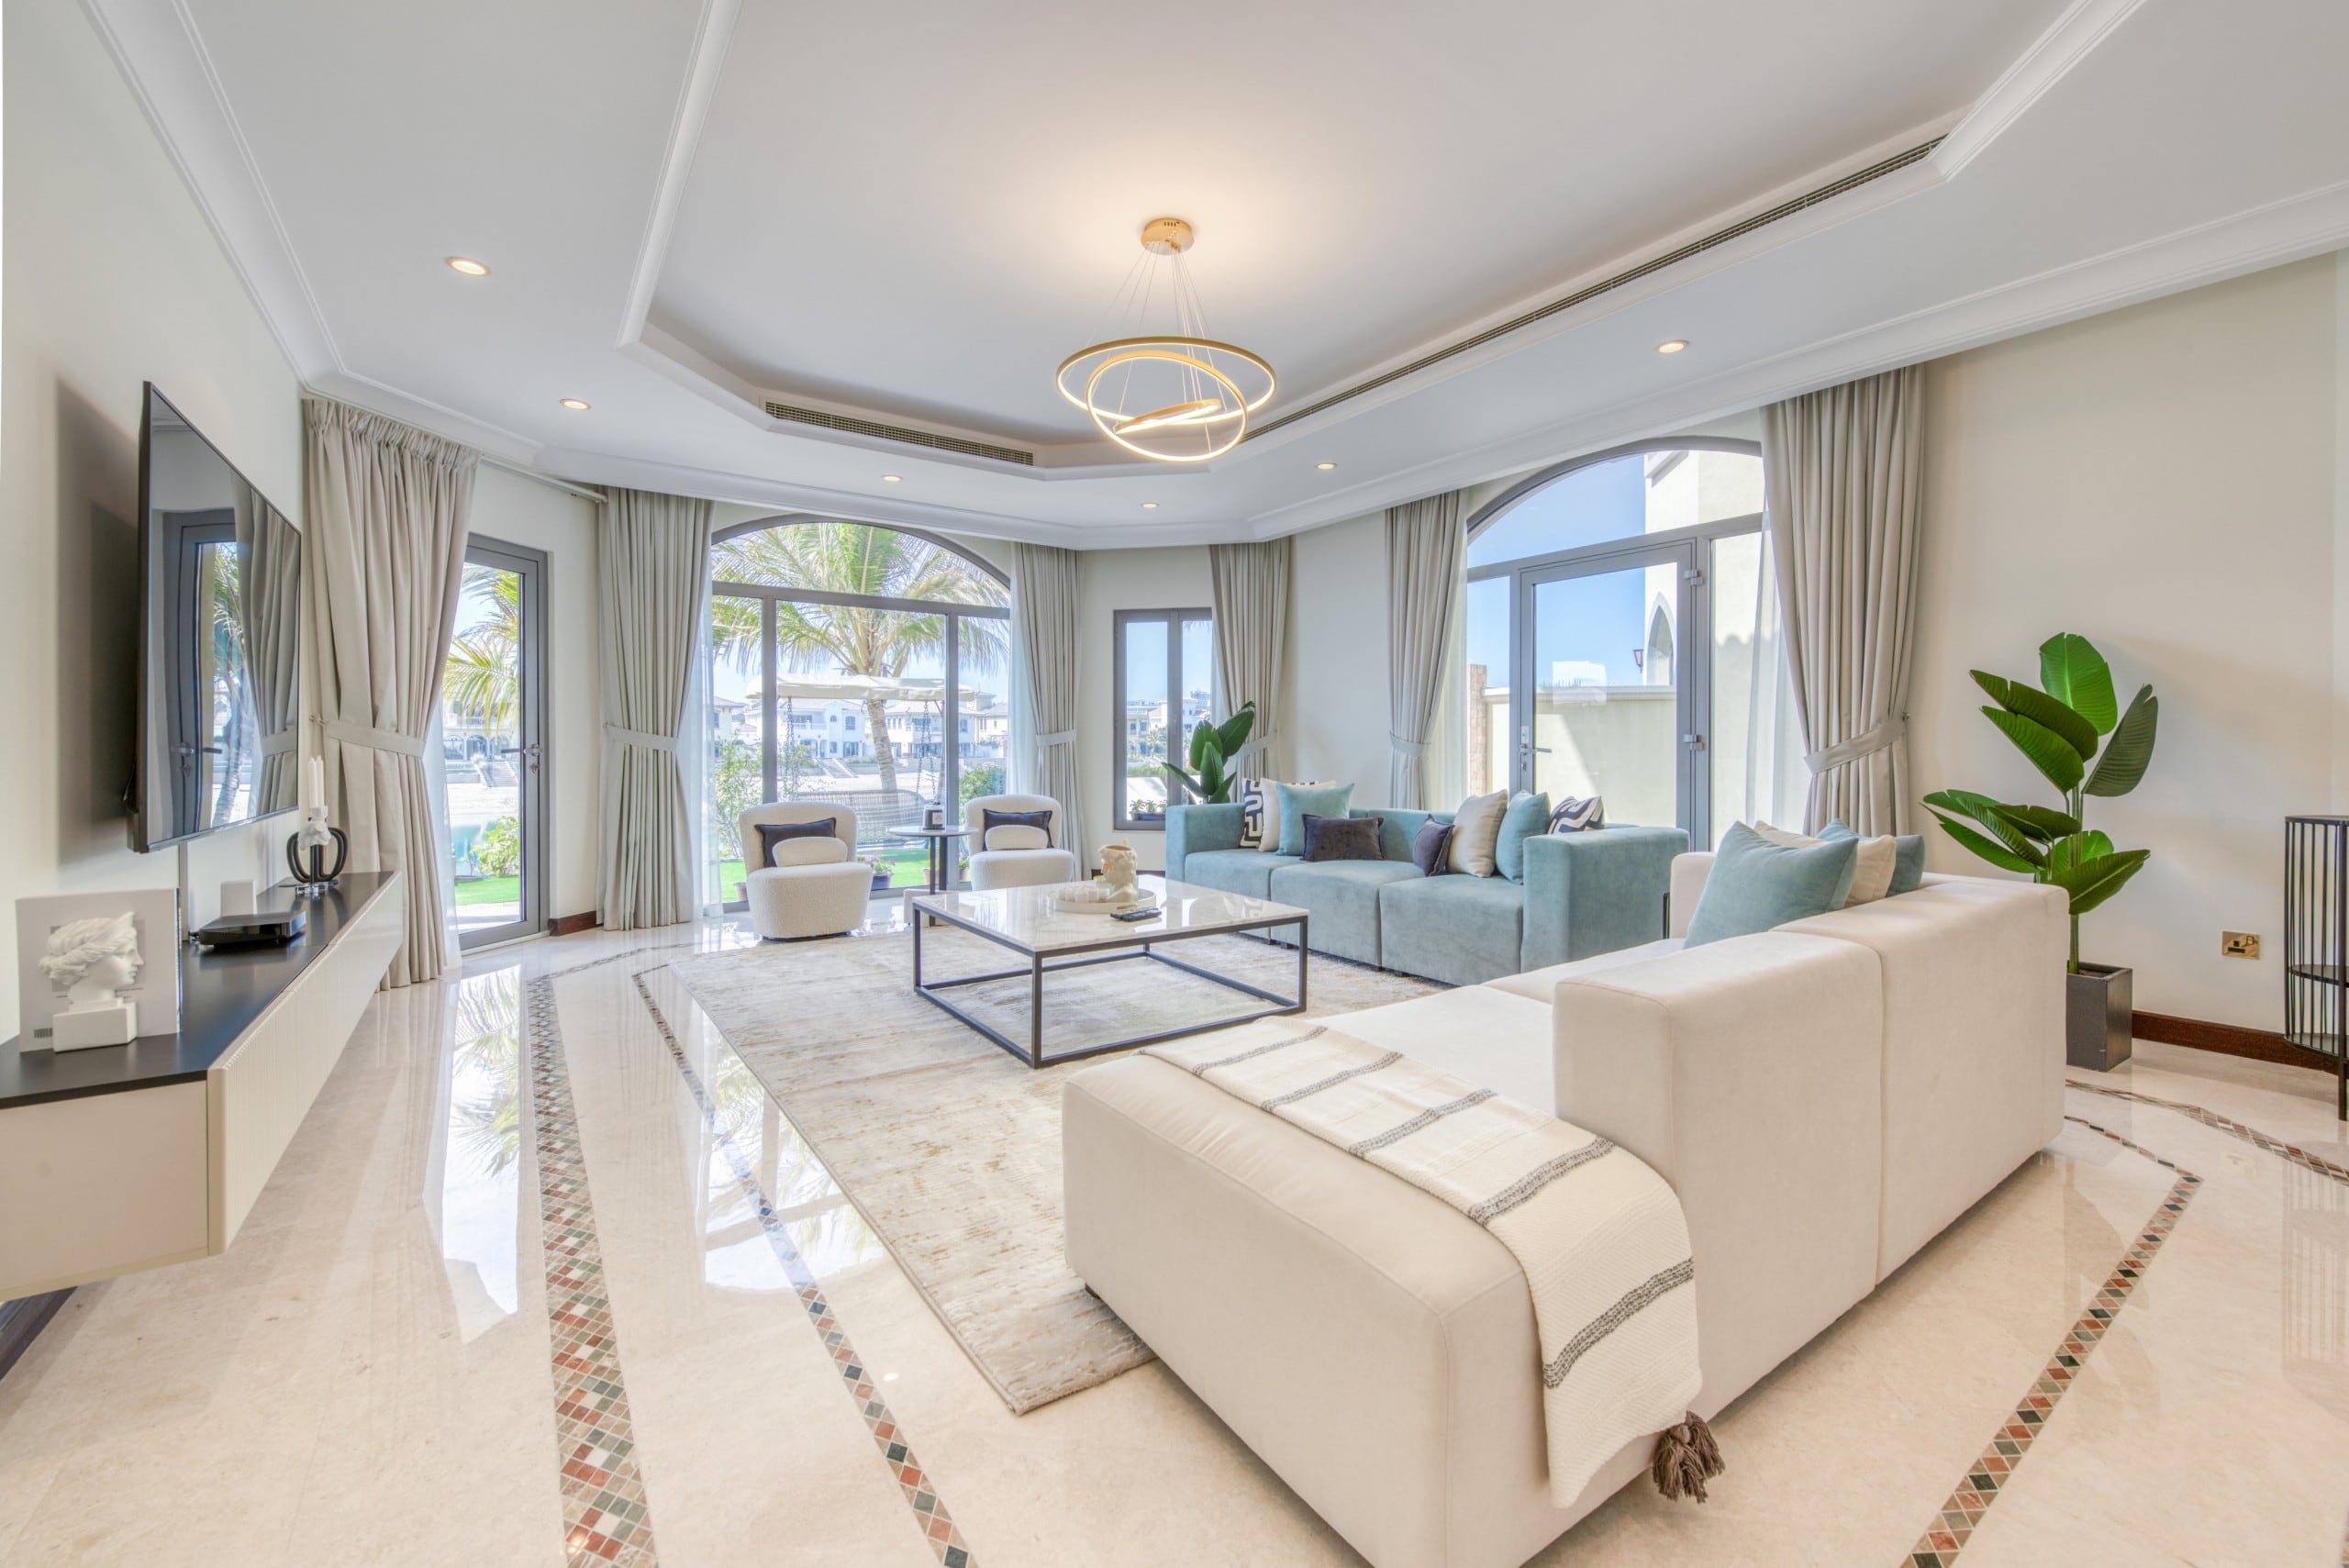 Property Image 2 - Glamorous 5BR Villa with Assistant Room and Private Pool in Frond C Palm Jumeirah